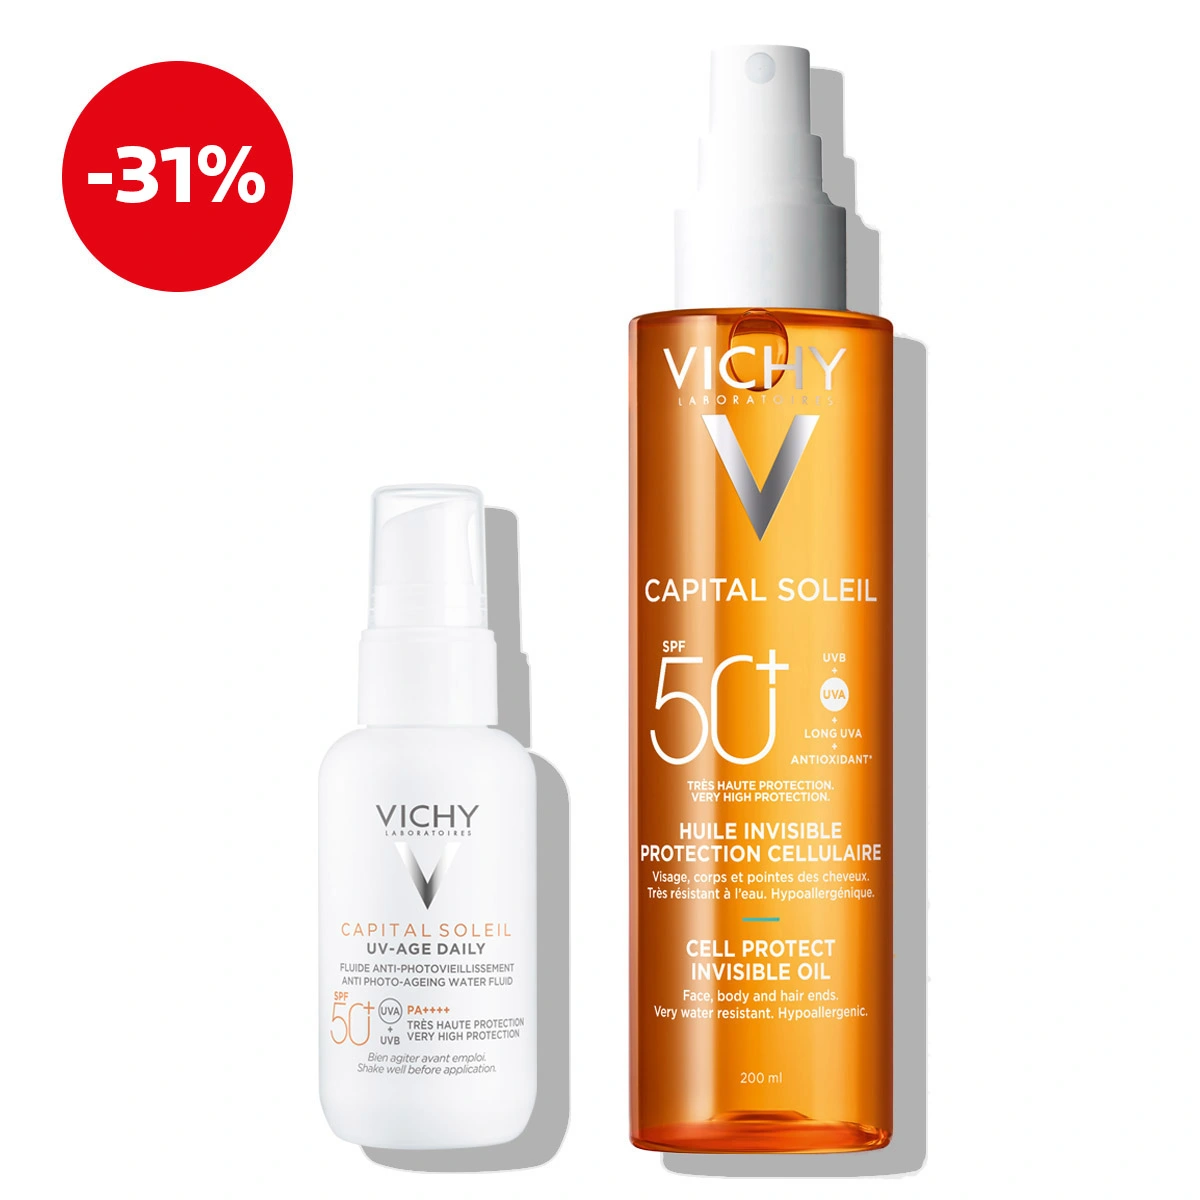 Vichy Capital Soleil Face & Body Duo; UVAge Daily Cel Protect Oil (1)